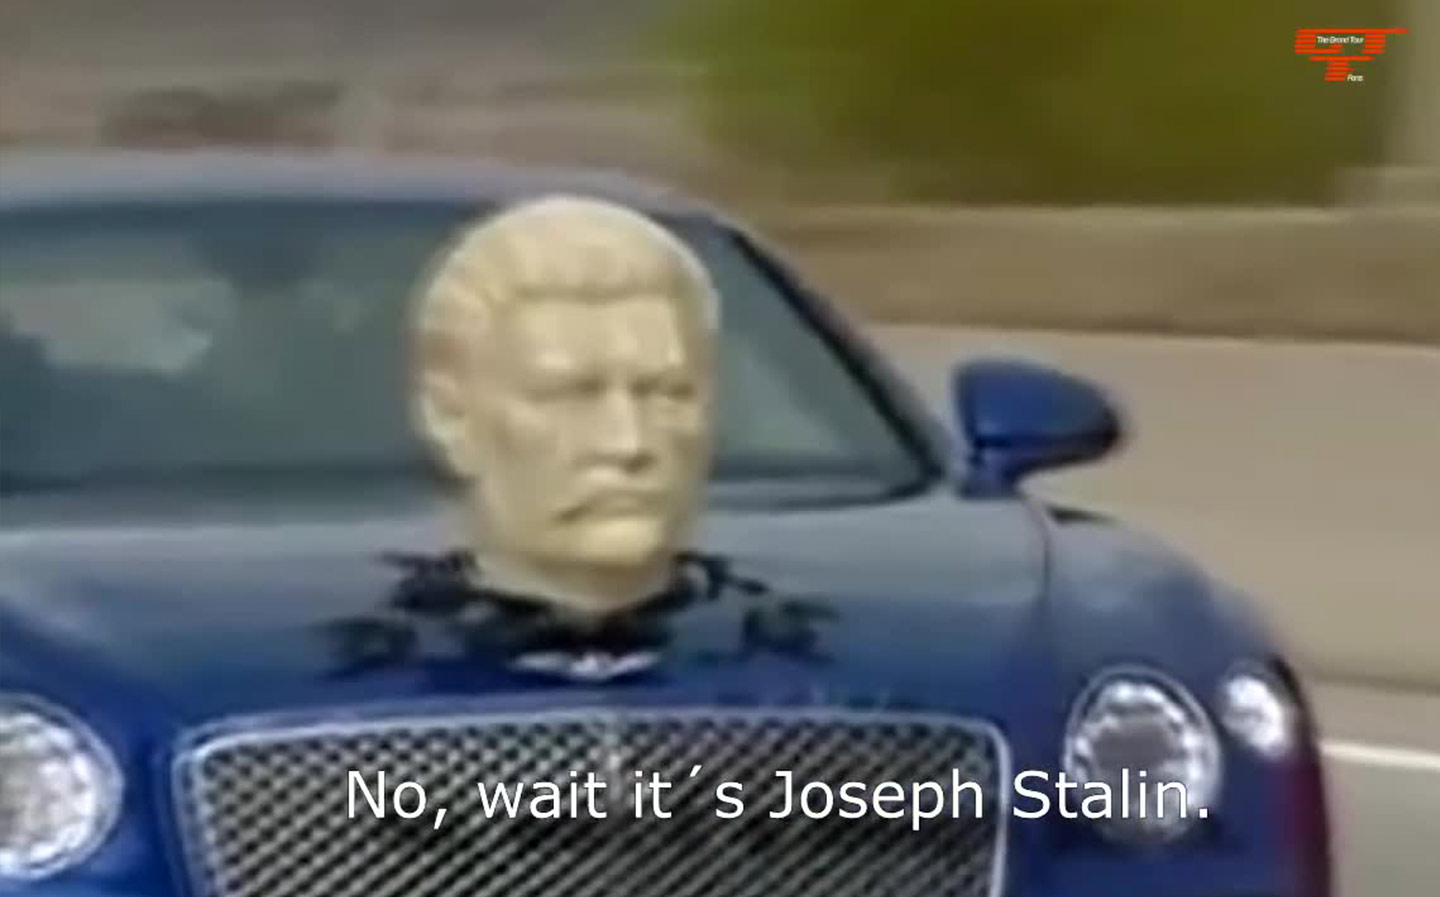 Clarkson, Hammond and May spotted in Georgia with bust of Stalin mounted to Bentley